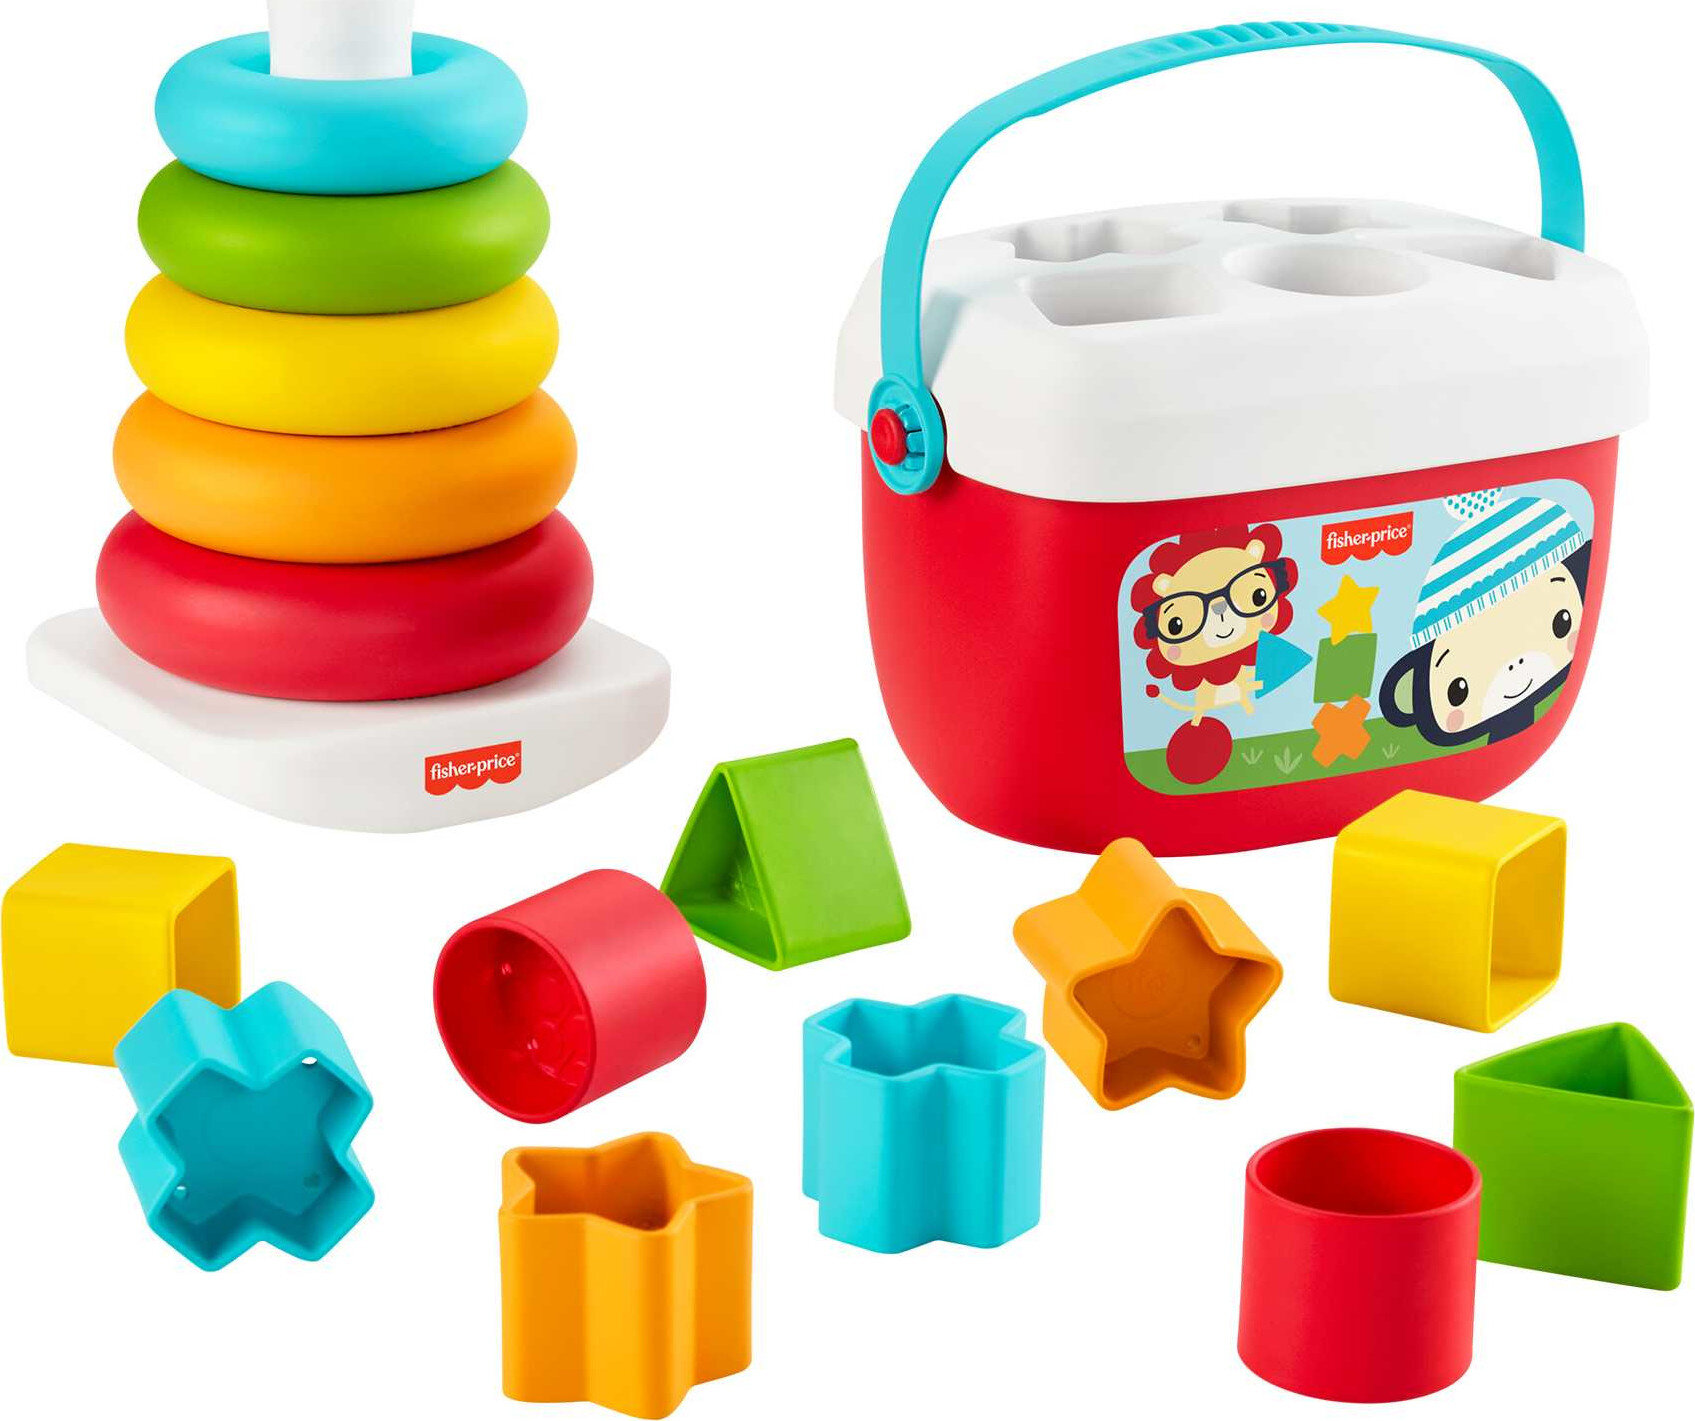 Fisher-Price Baby’s First Blocks & Rock-a-Stack Infant Toy Gift Set Made From Plant-Based Materials - image 1 of 6